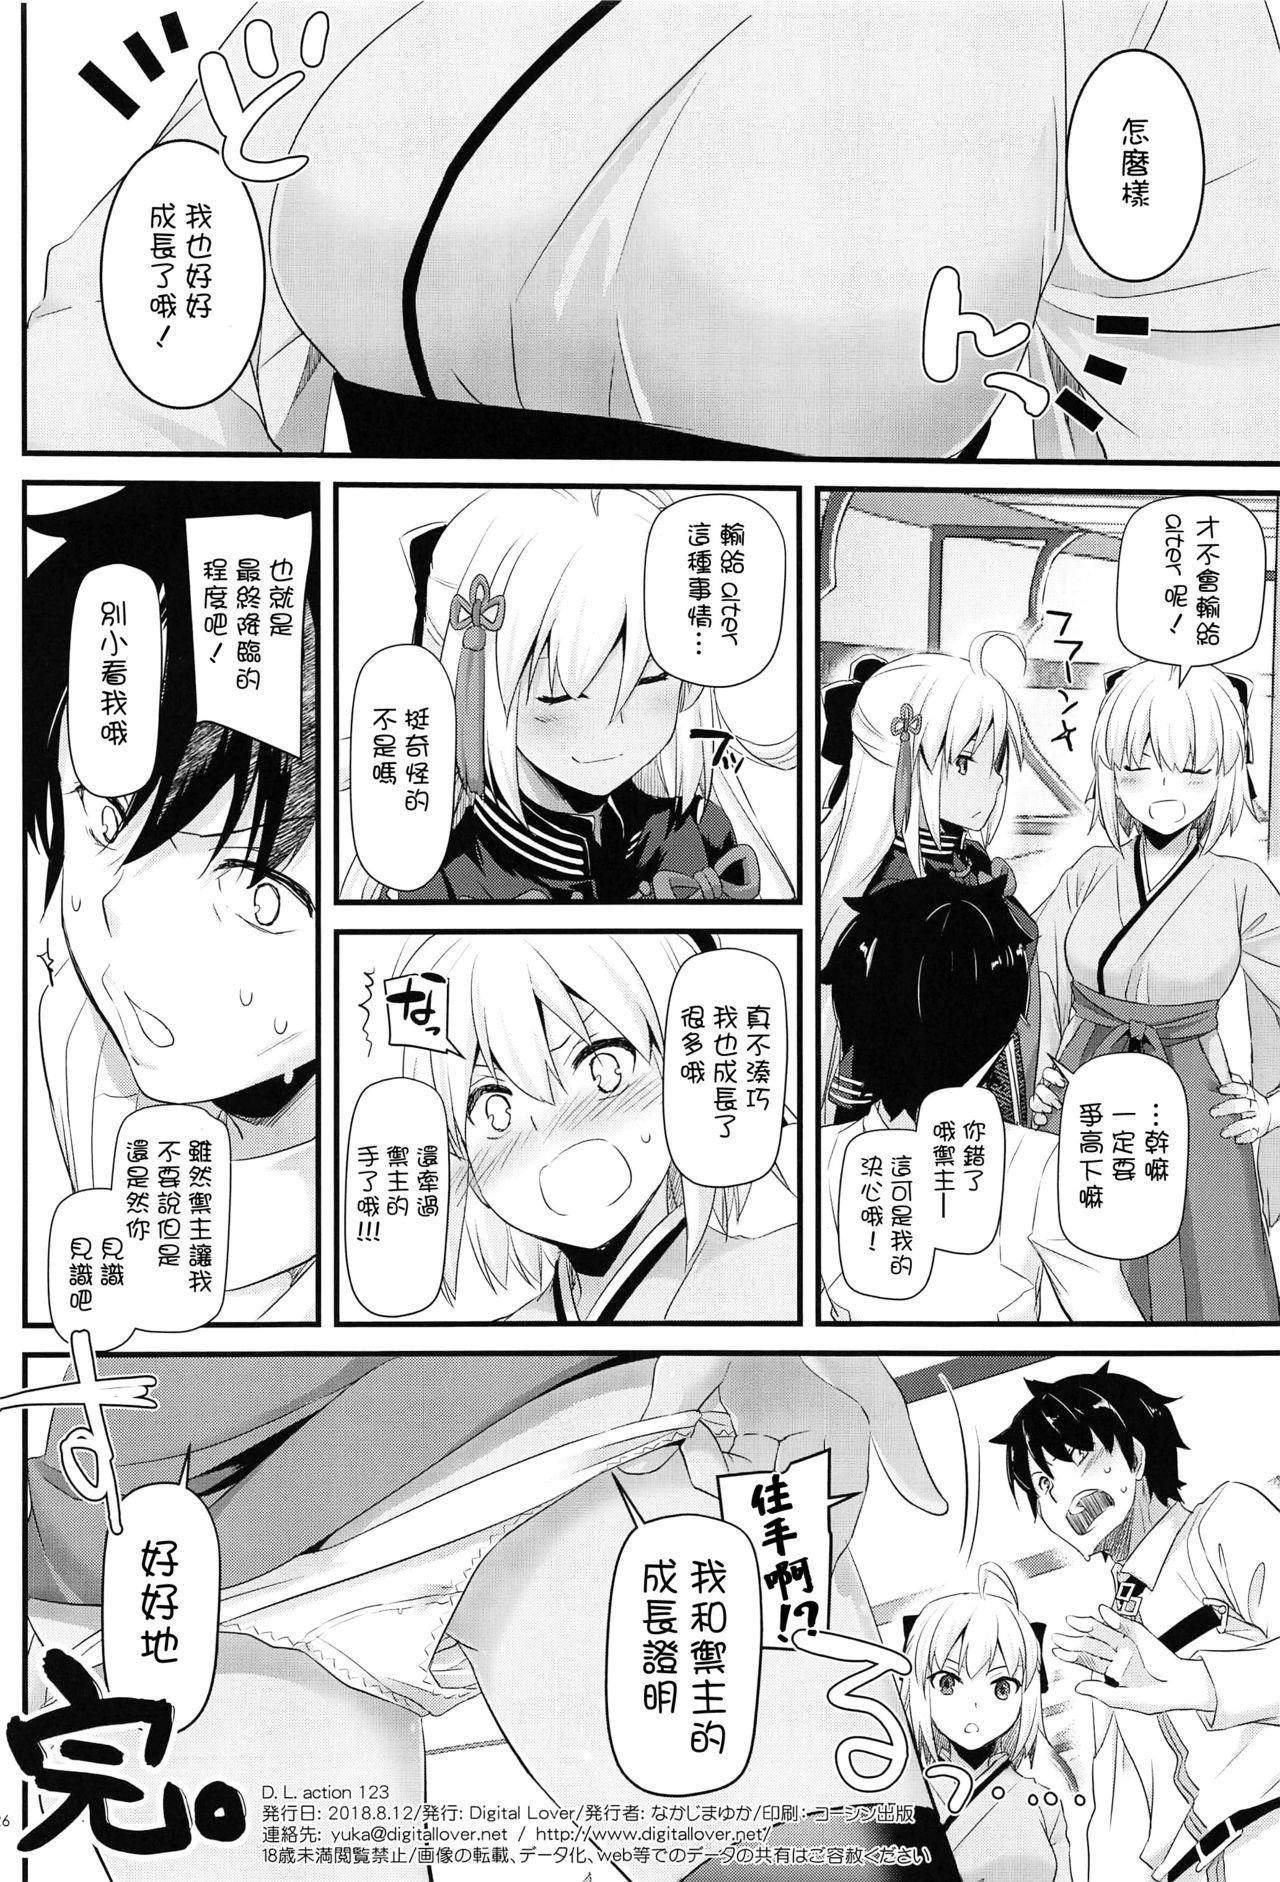 Bedroom D.L. action 123 - Fate grand order Amigos - Page 26